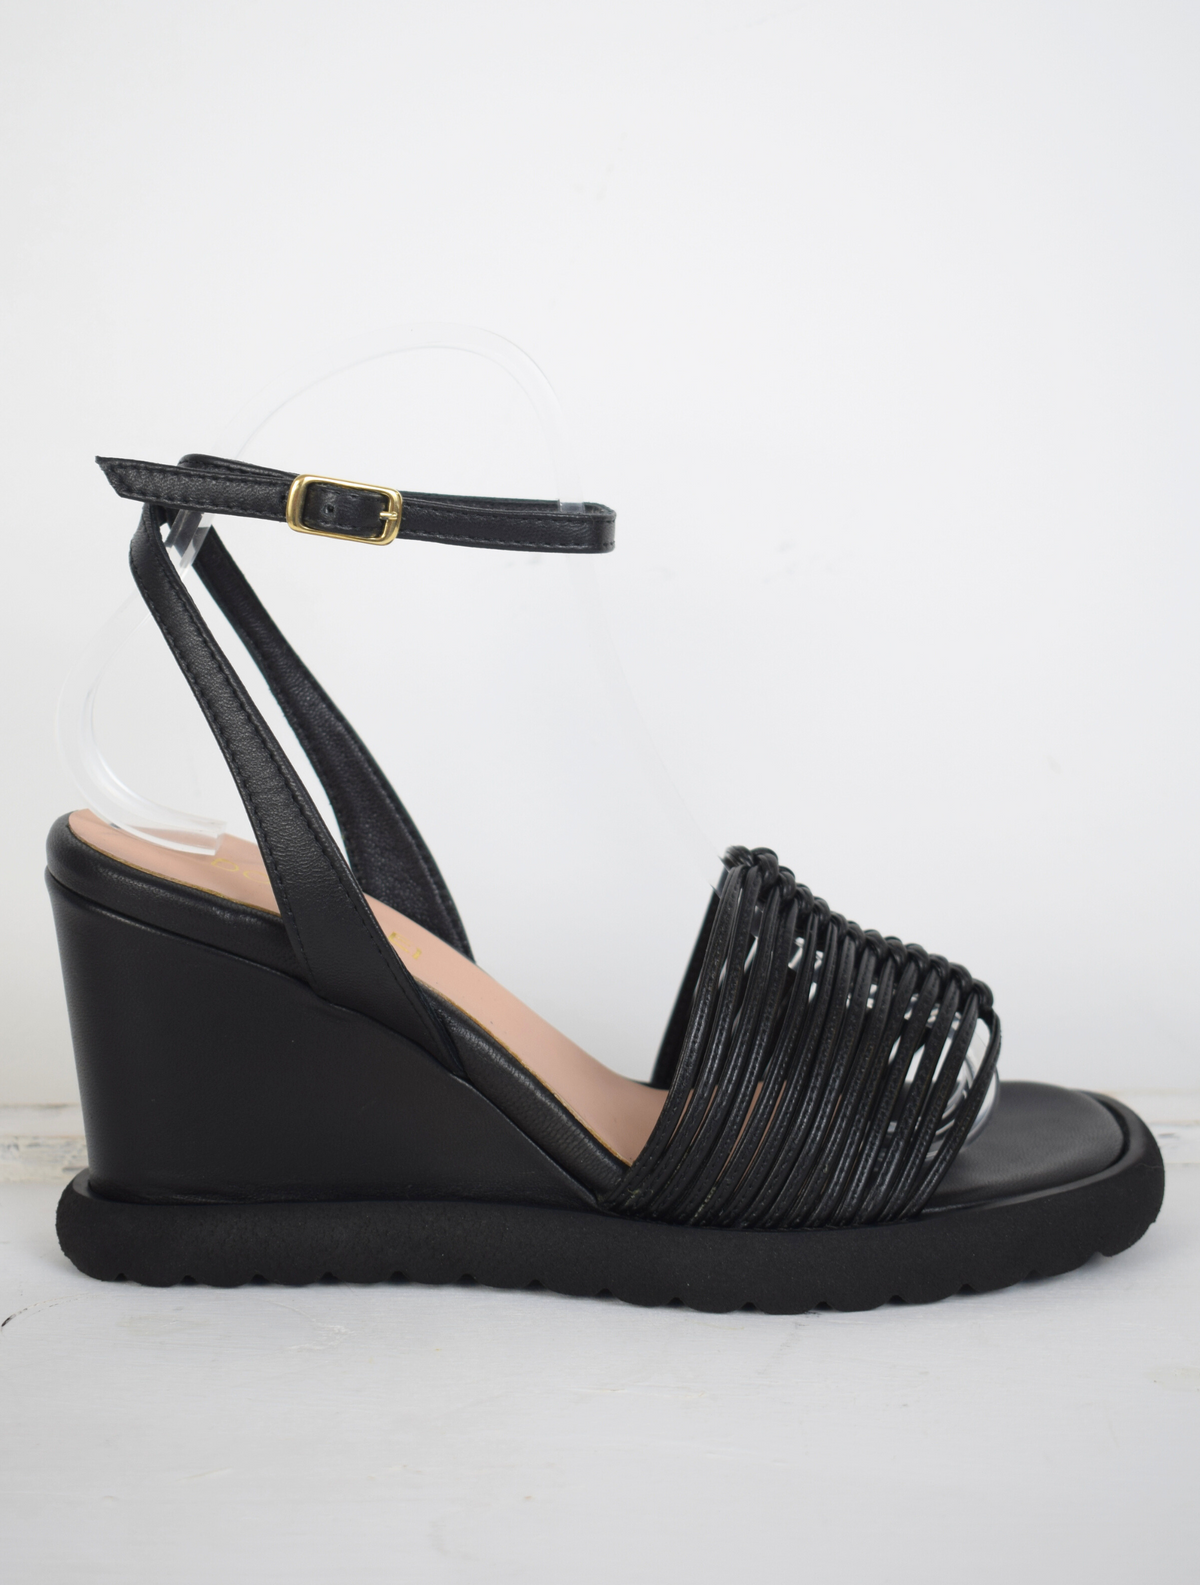 Black strappy wedges with moulded sole